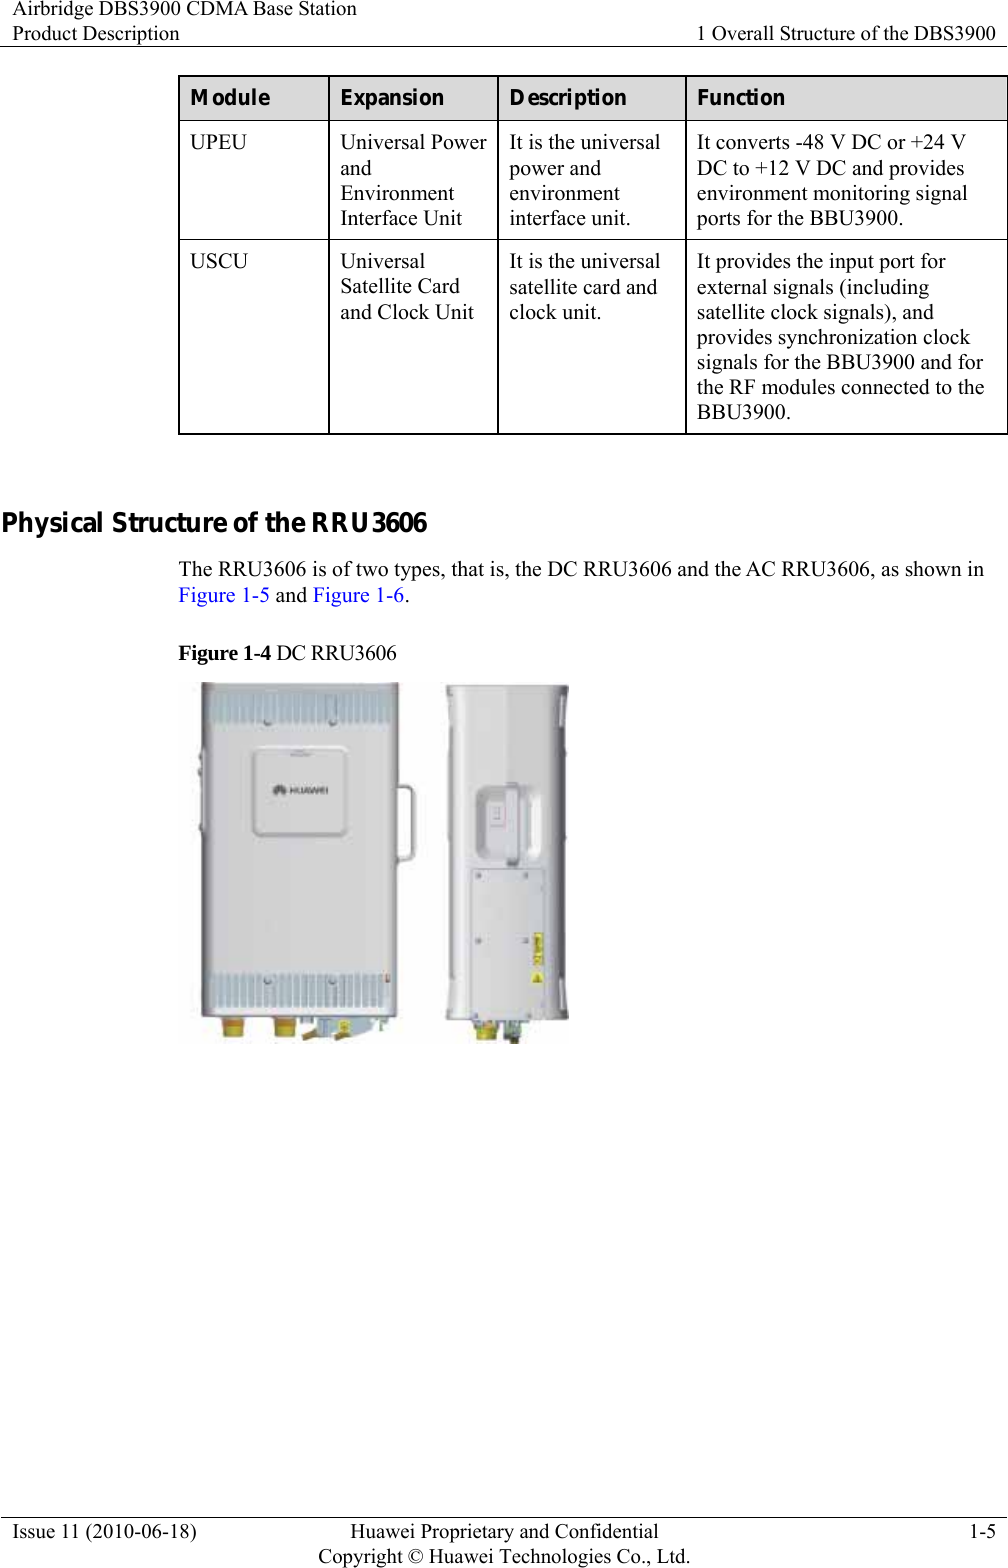 Airbridge DBS3900 CDMA Base Station Product Description  1 Overall Structure of the DBS3900 Issue 11 (2010-06-18)  Huawei Proprietary and Confidential         Copyright © Huawei Technologies Co., Ltd.1-5 Module  Expansion  Description  Function UPEU Universal Power and Environment Interface Unit It is the universal power and environment interface unit. It converts -48 V DC or +24 V DC to +12 V DC and provides environment monitoring signal ports for the BBU3900. USCU Universal Satellite Card and Clock Unit It is the universal satellite card and clock unit. It provides the input port for external signals (including satellite clock signals), and provides synchronization clock signals for the BBU3900 and for the RF modules connected to the BBU3900.  Physical Structure of the RRU3606 The RRU3606 is of two types, that is, the DC RRU3606 and the AC RRU3606, as shown in Figure 1-5 and Figure 1-6. Figure 1-4 DC RRU3606   